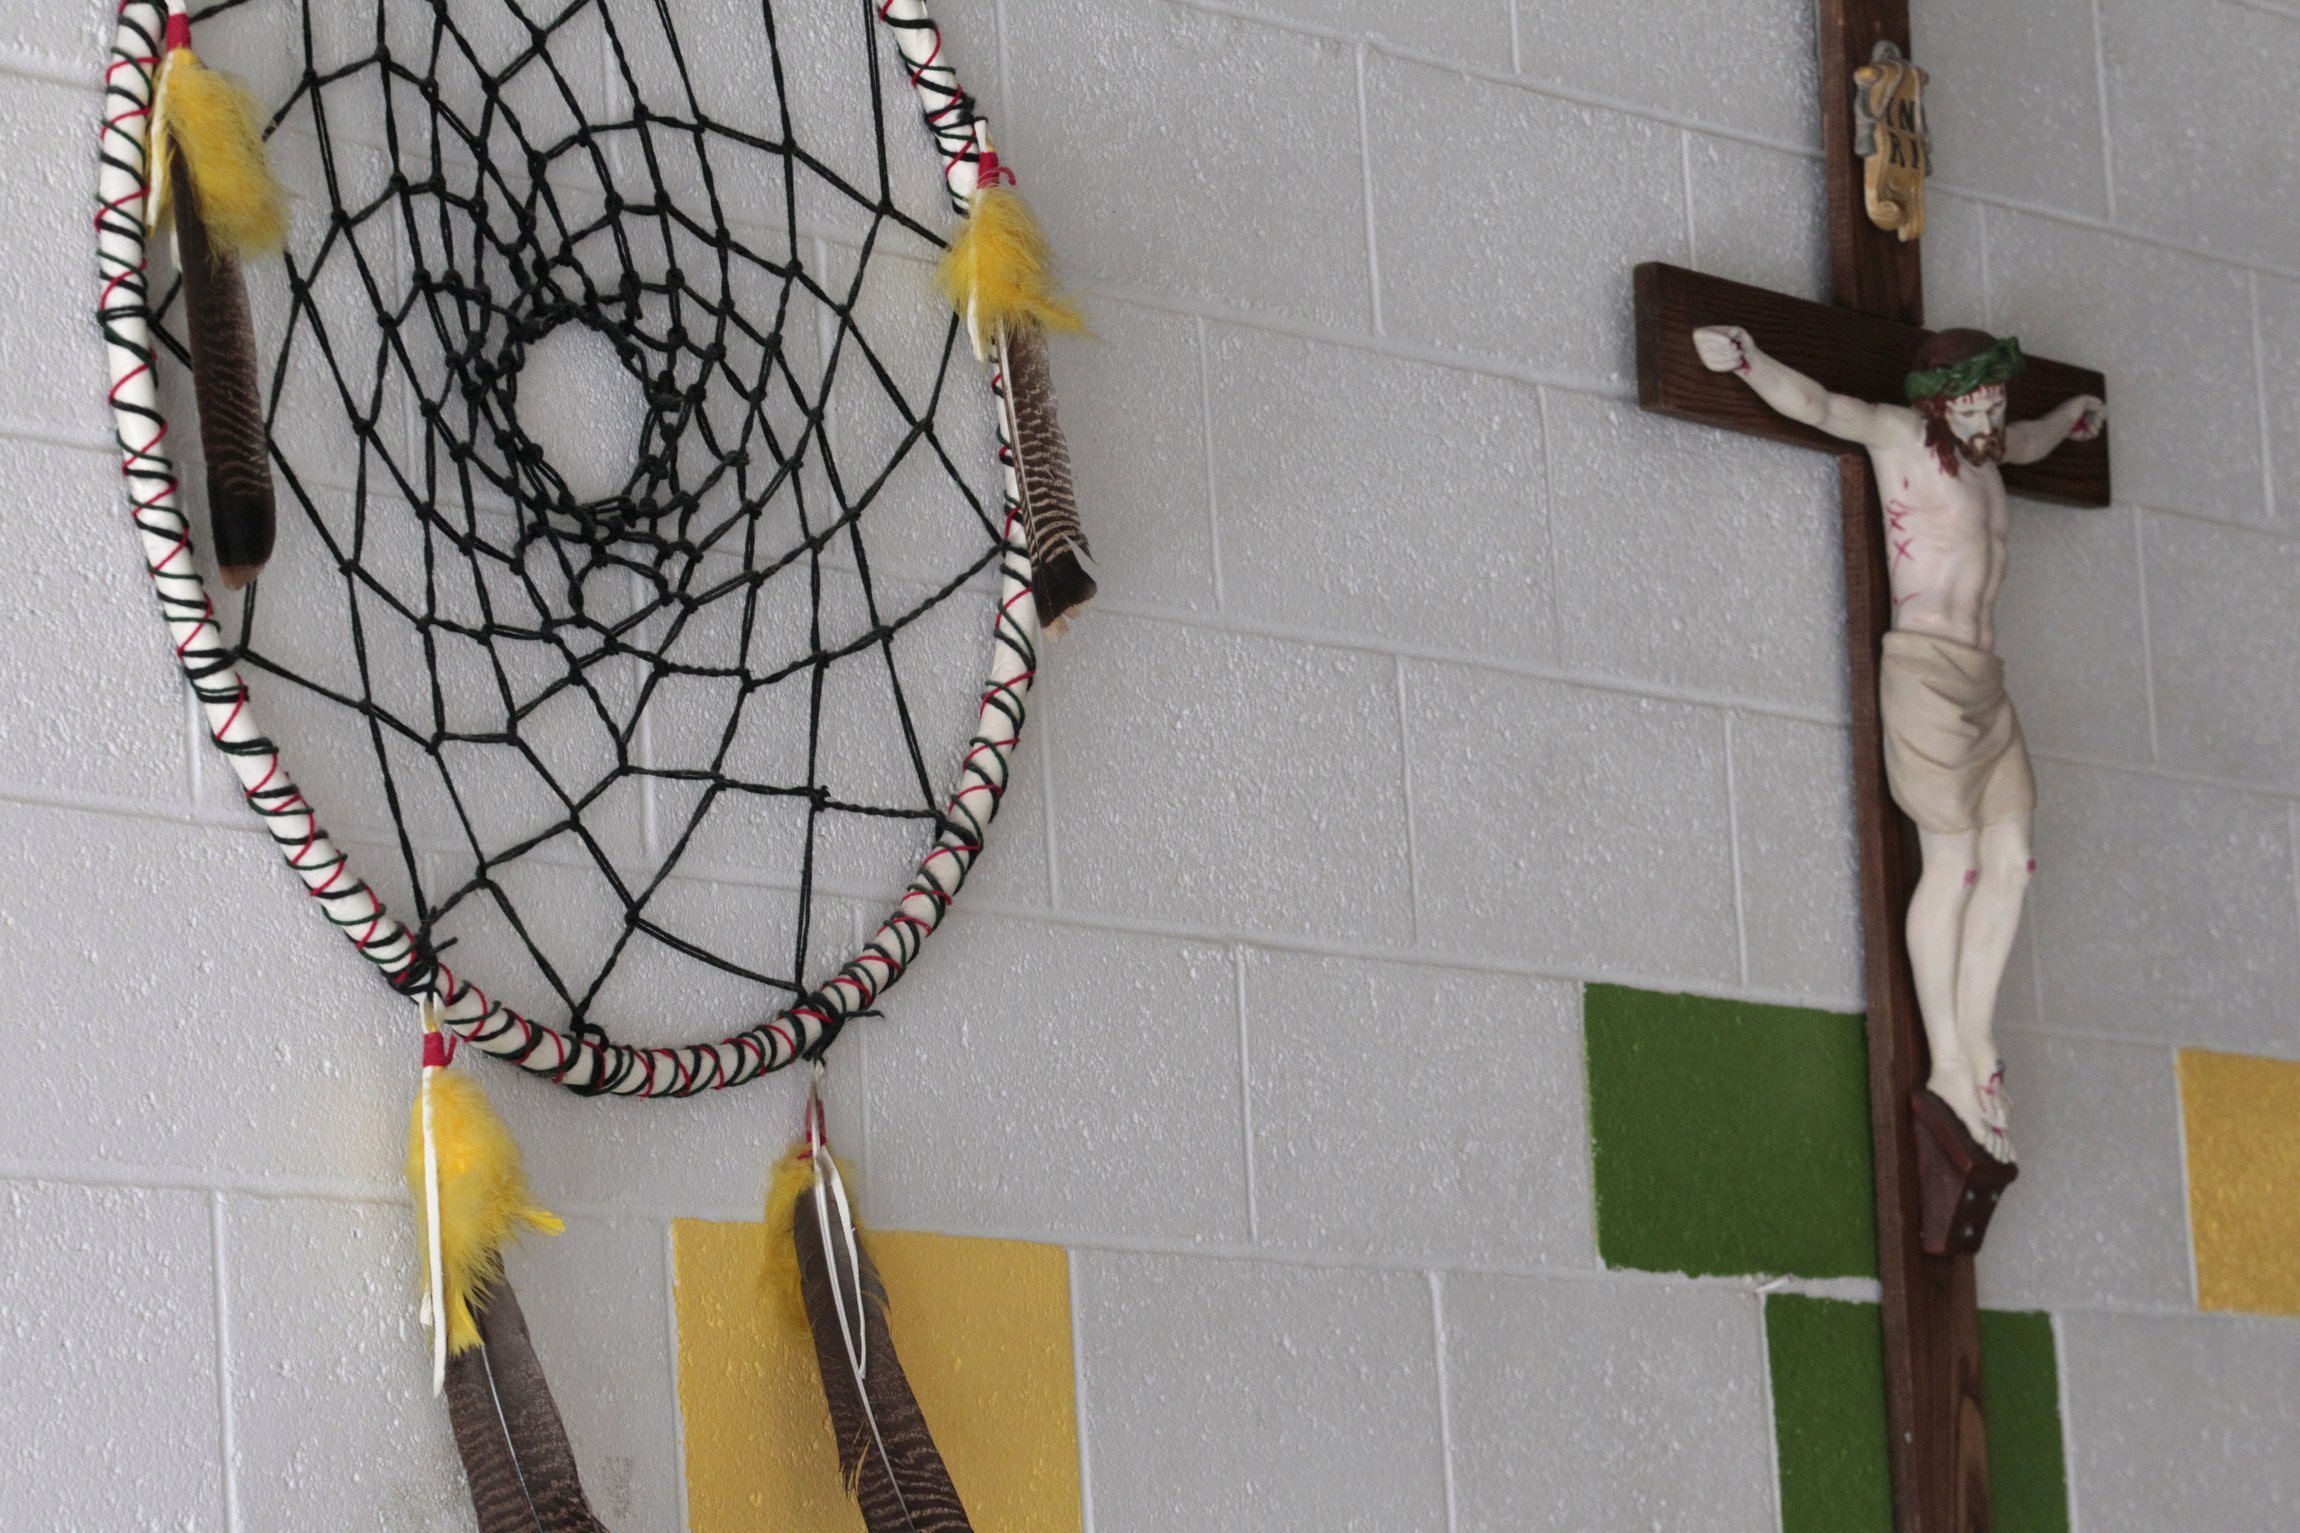 A dream catcher and crucifix are seen on the wall at St. Anthony Indian School on the Zuni Pueblo Indian reservation in New Mexico in this 2011 file photo. (CNS photo/Bob Roller)